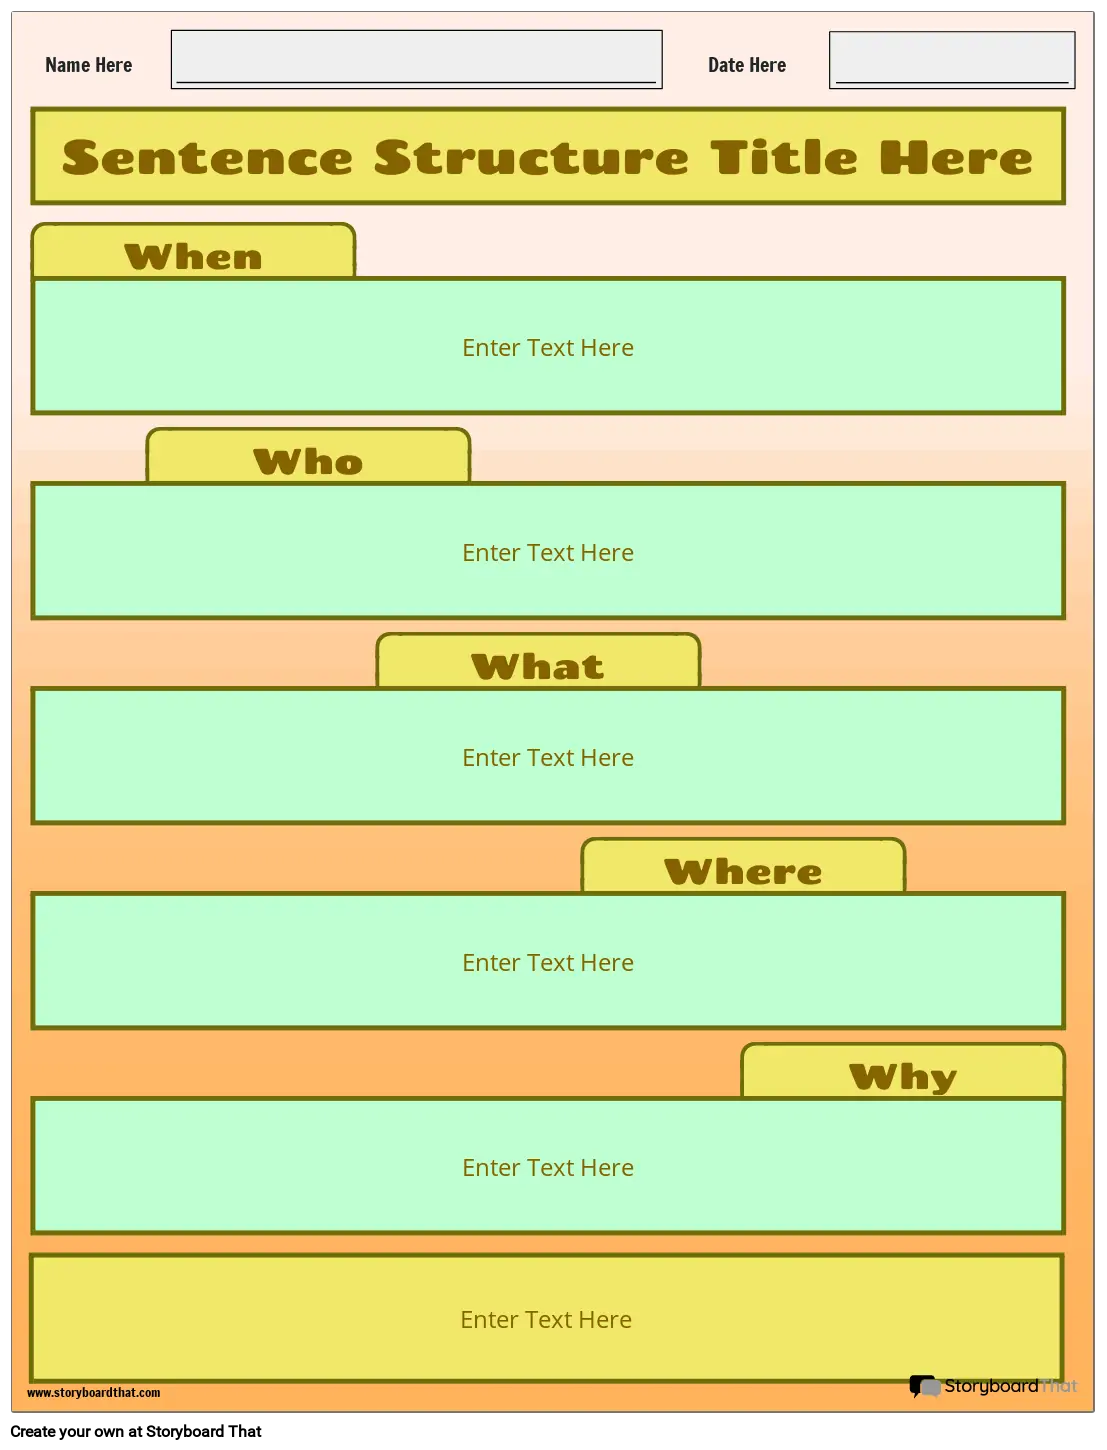 new-create-page-sentence-structure-template-1